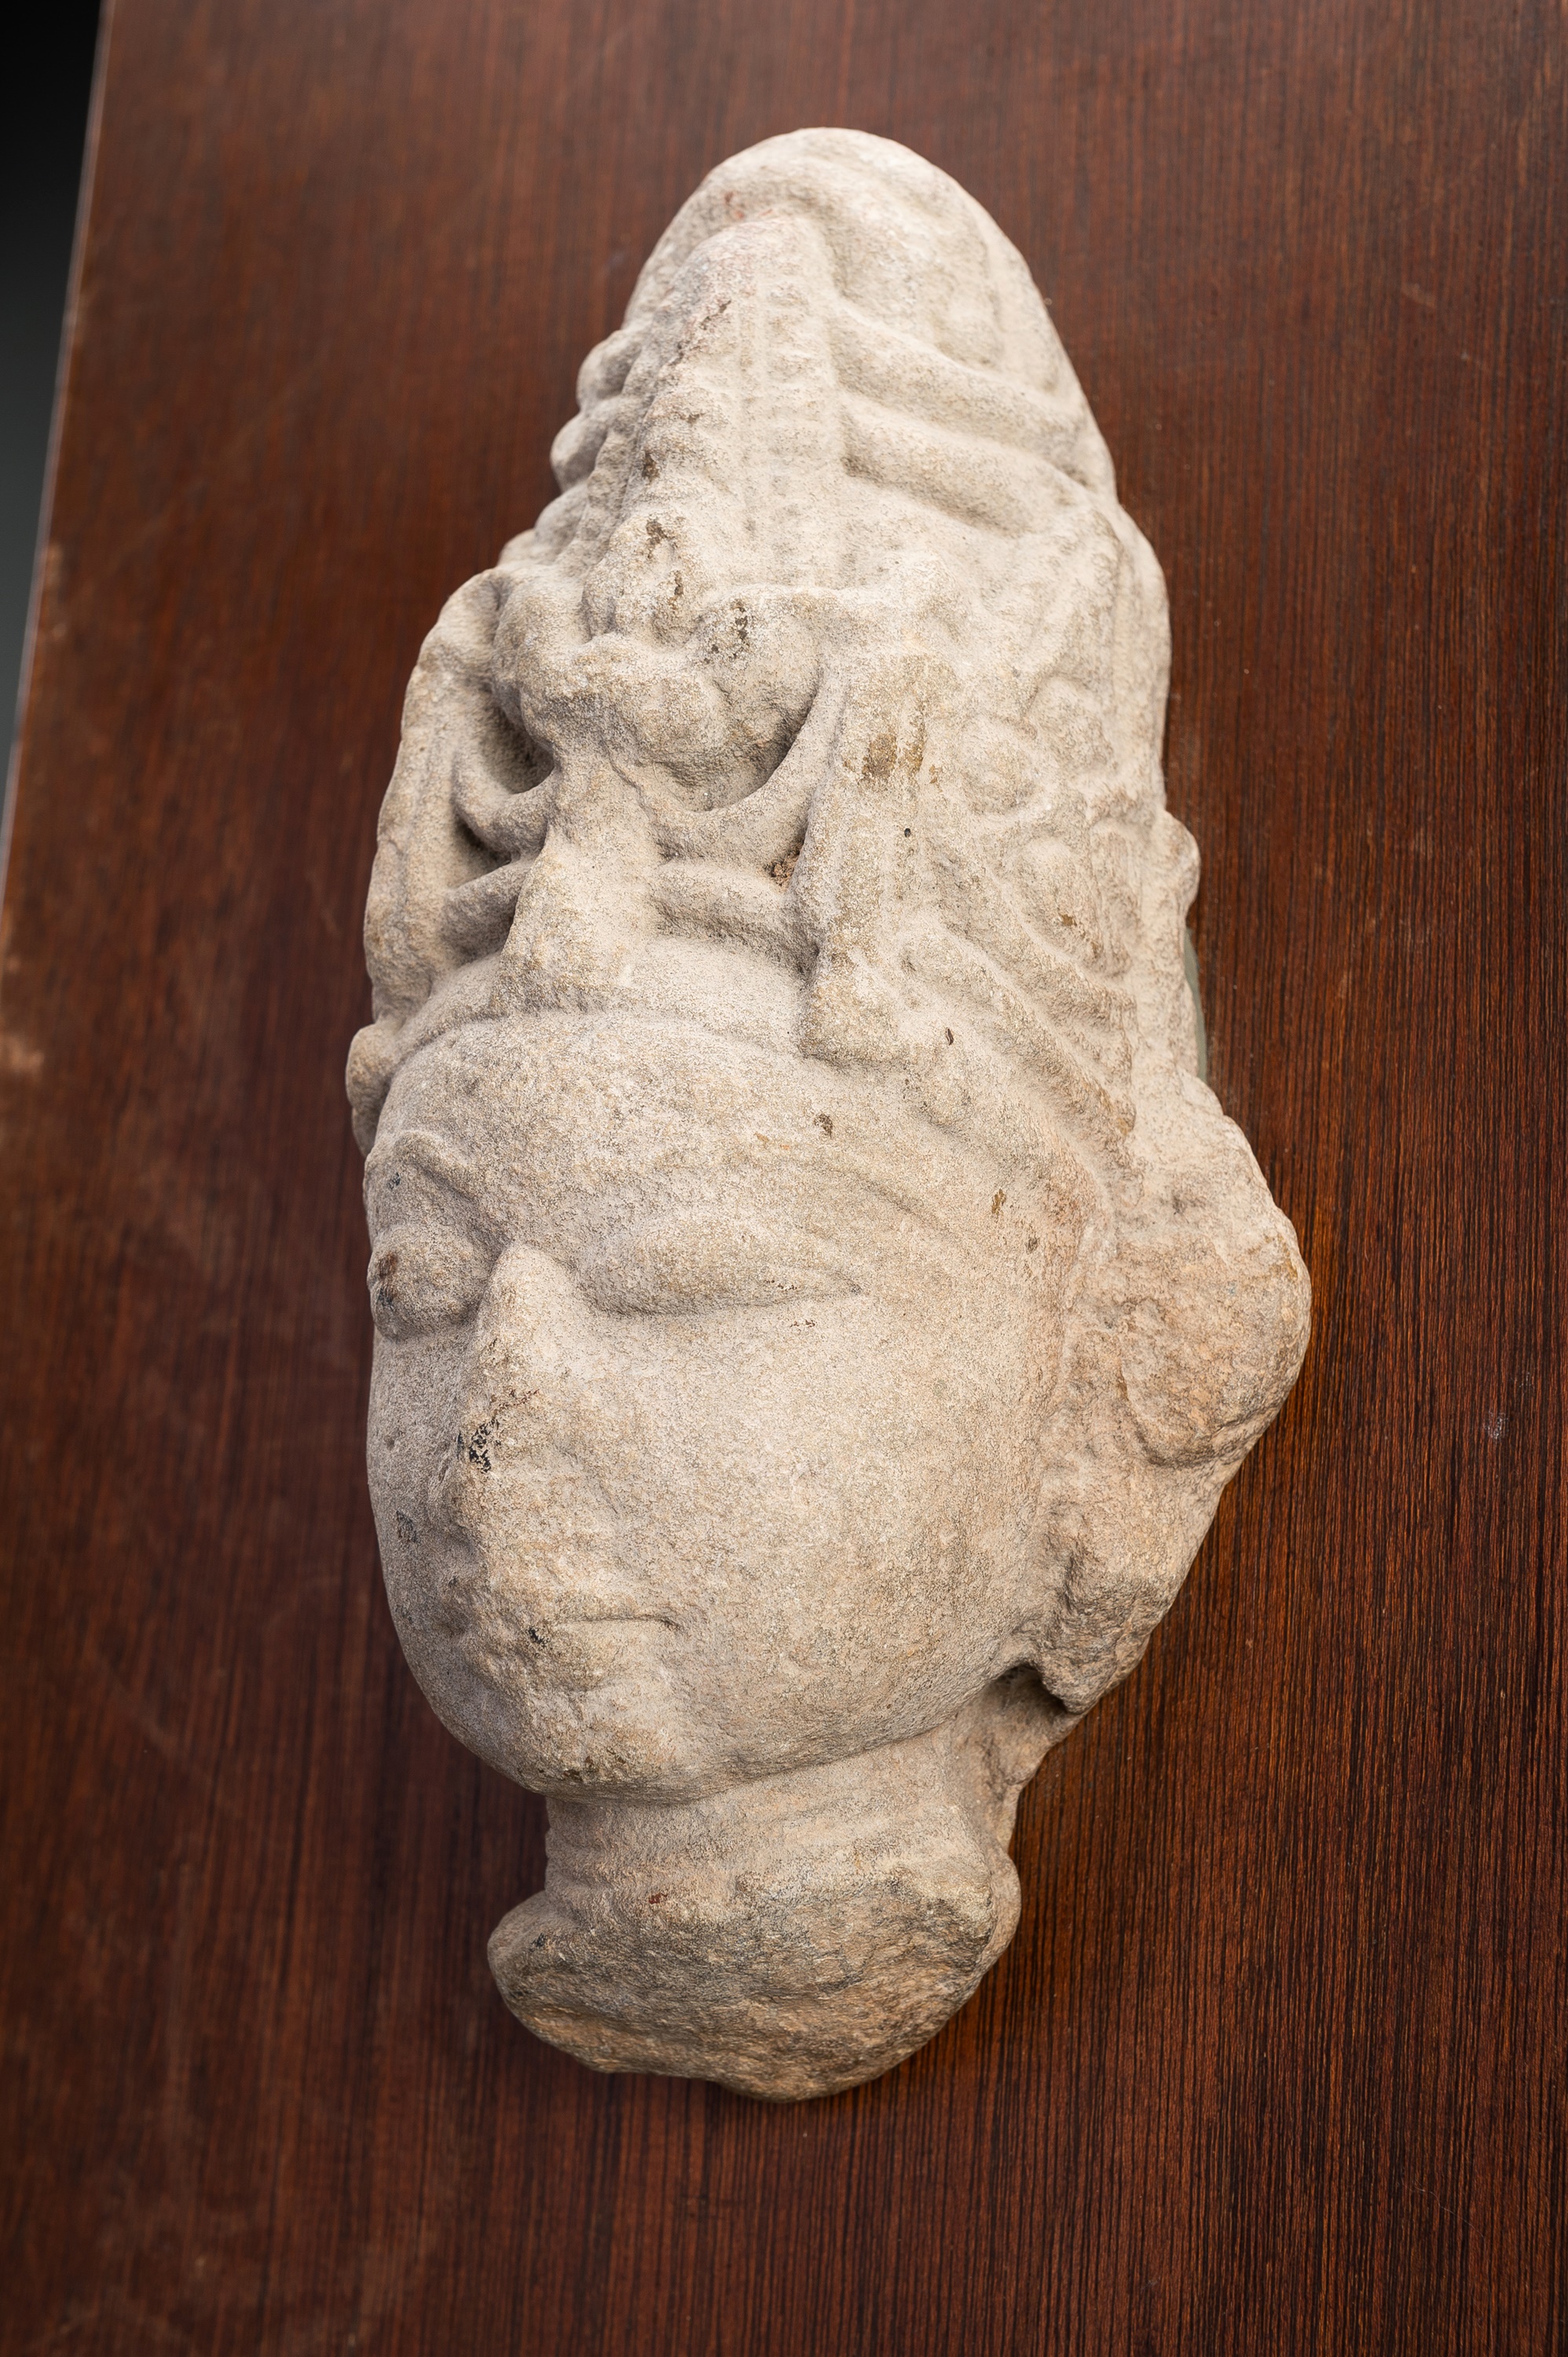 A SANDSTONE HEAD OF VISHNU WITH A MITER CROWN - Image 2 of 14